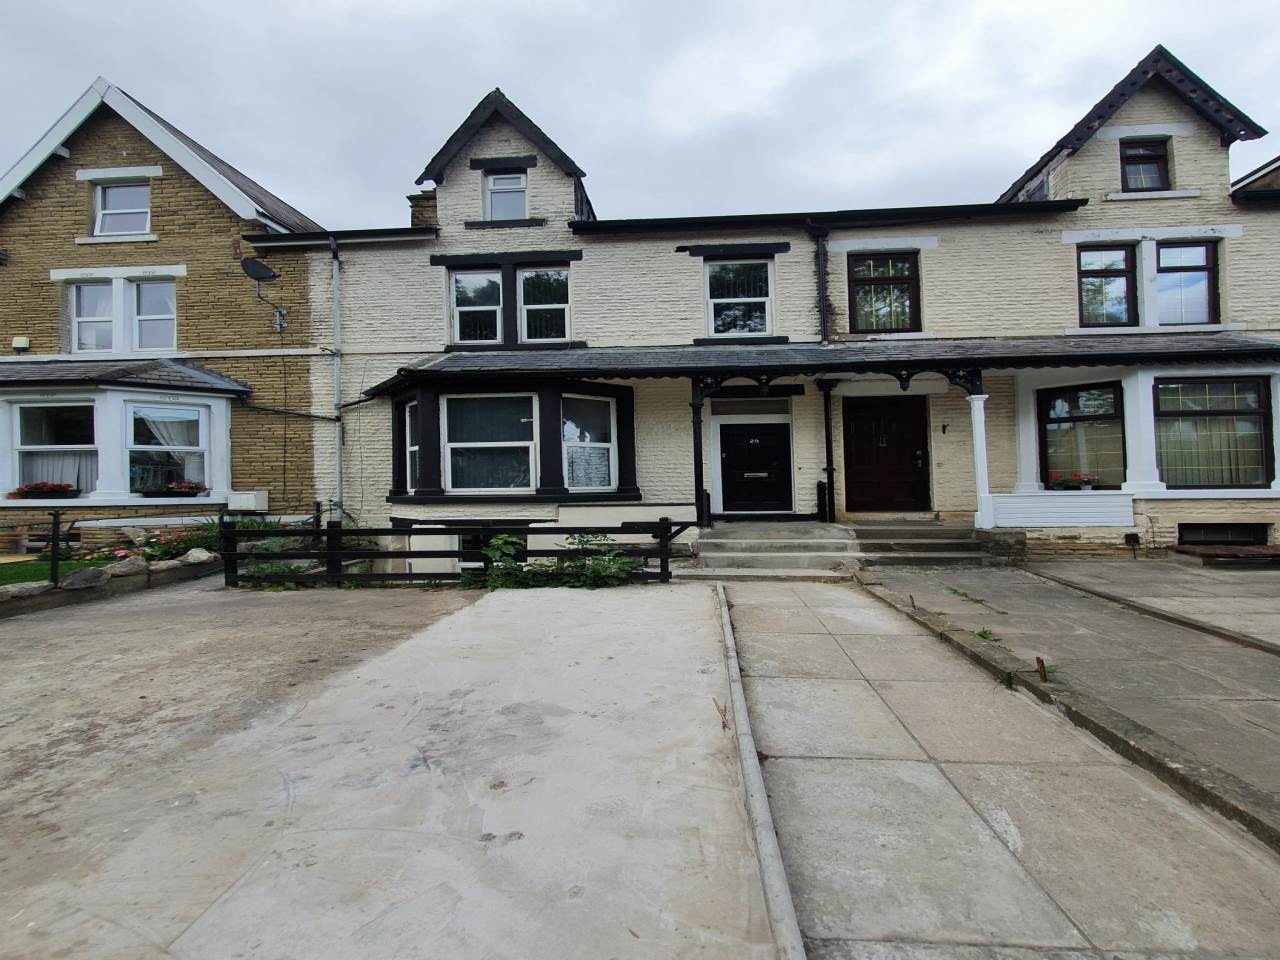 1 bed house / flat share to rent in 29 Pemberton drive , Bradford  - Property Image 1